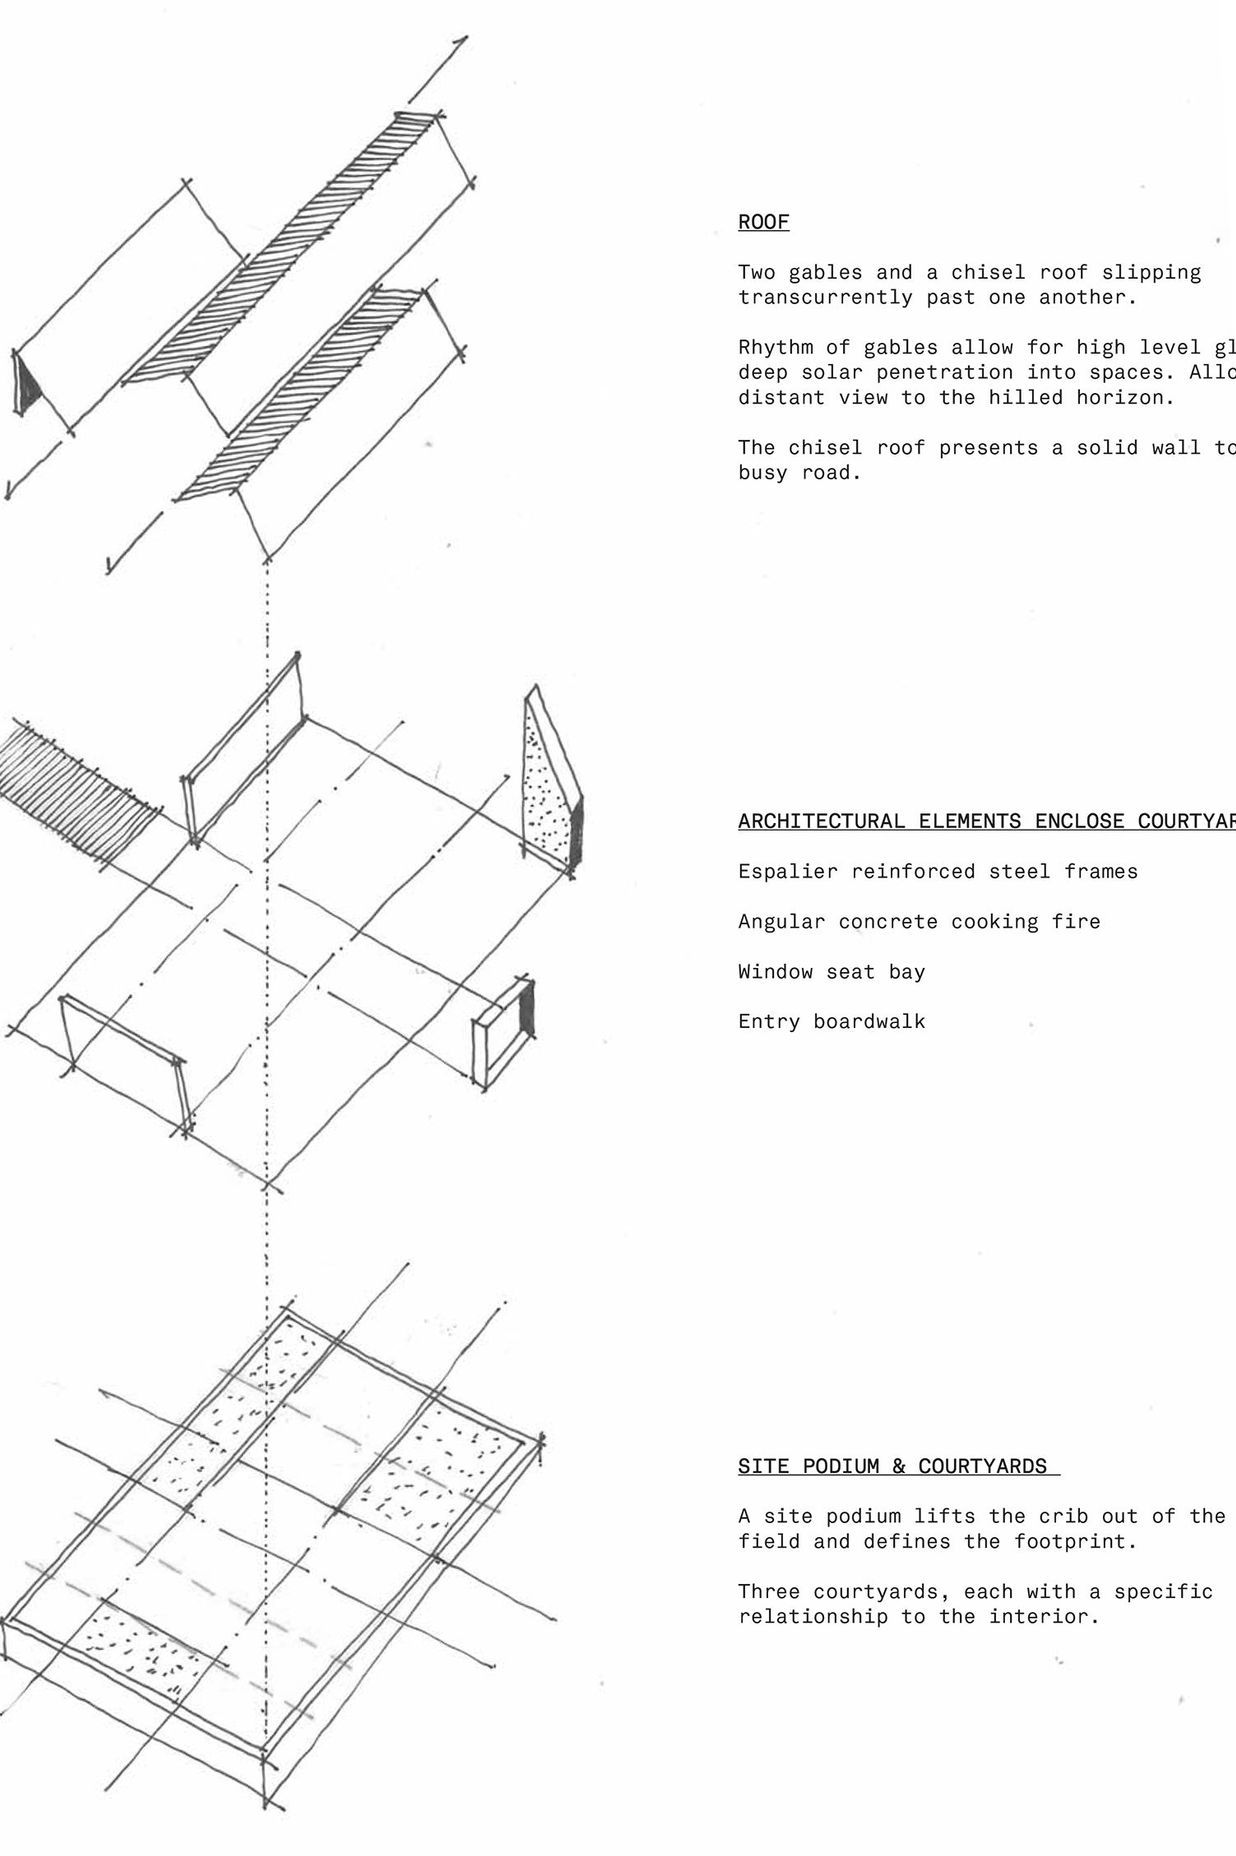 Diagrams of Wanaka Crib's structure by PAC Studio and Steven Lloyd Architecture.